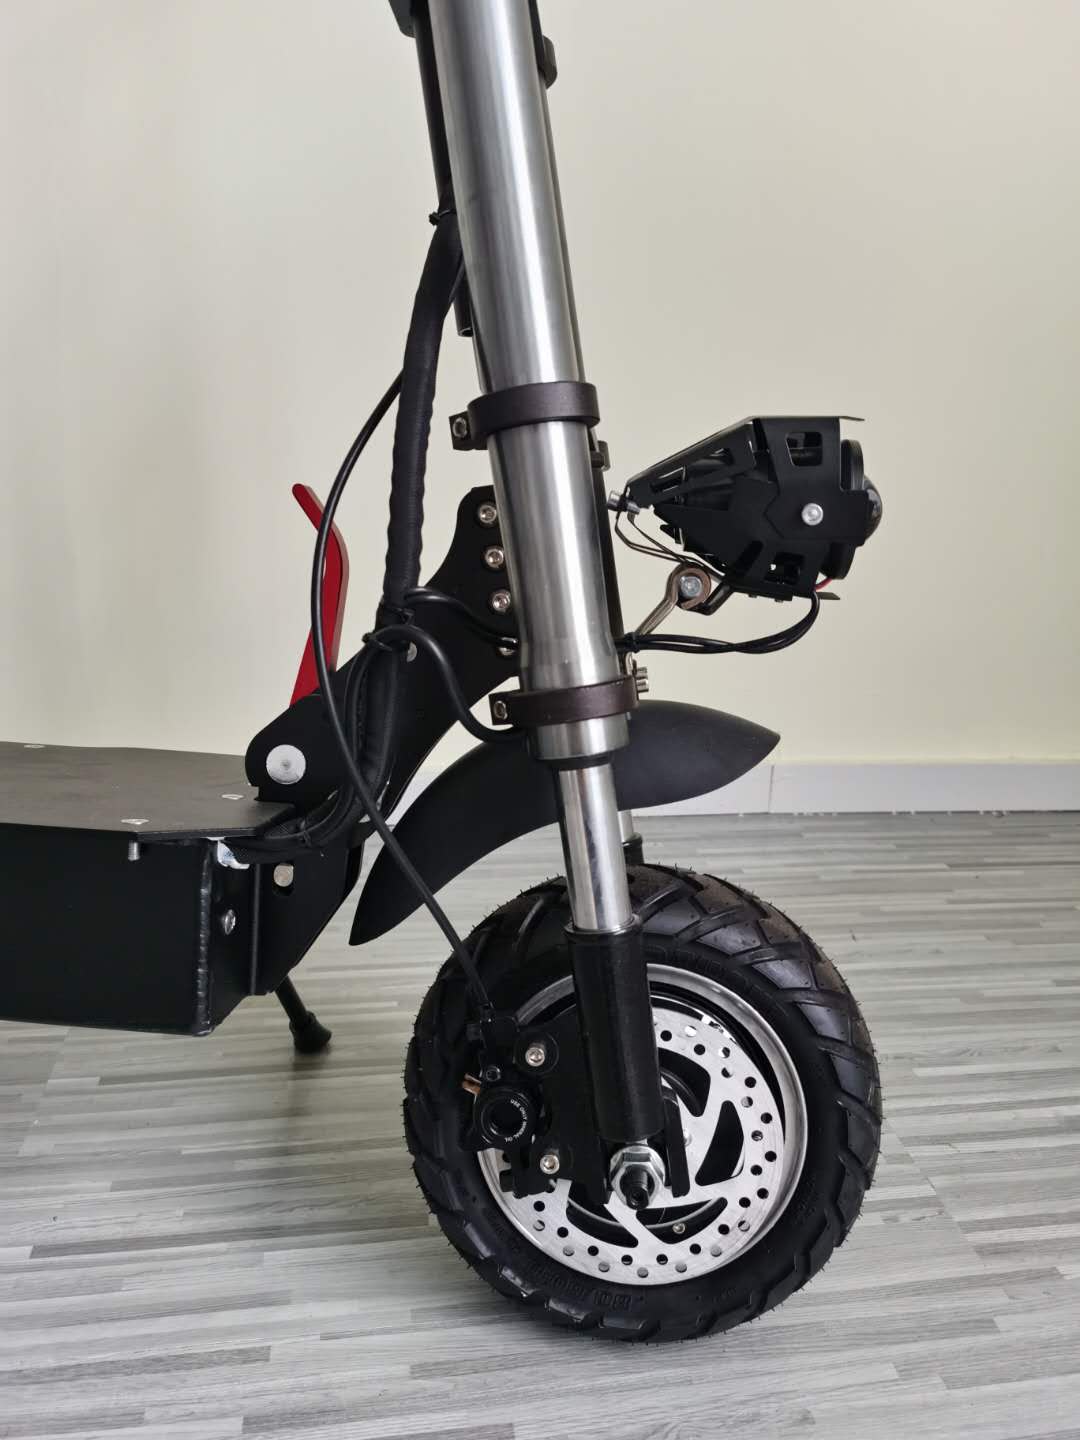 Electric Scooter HB07